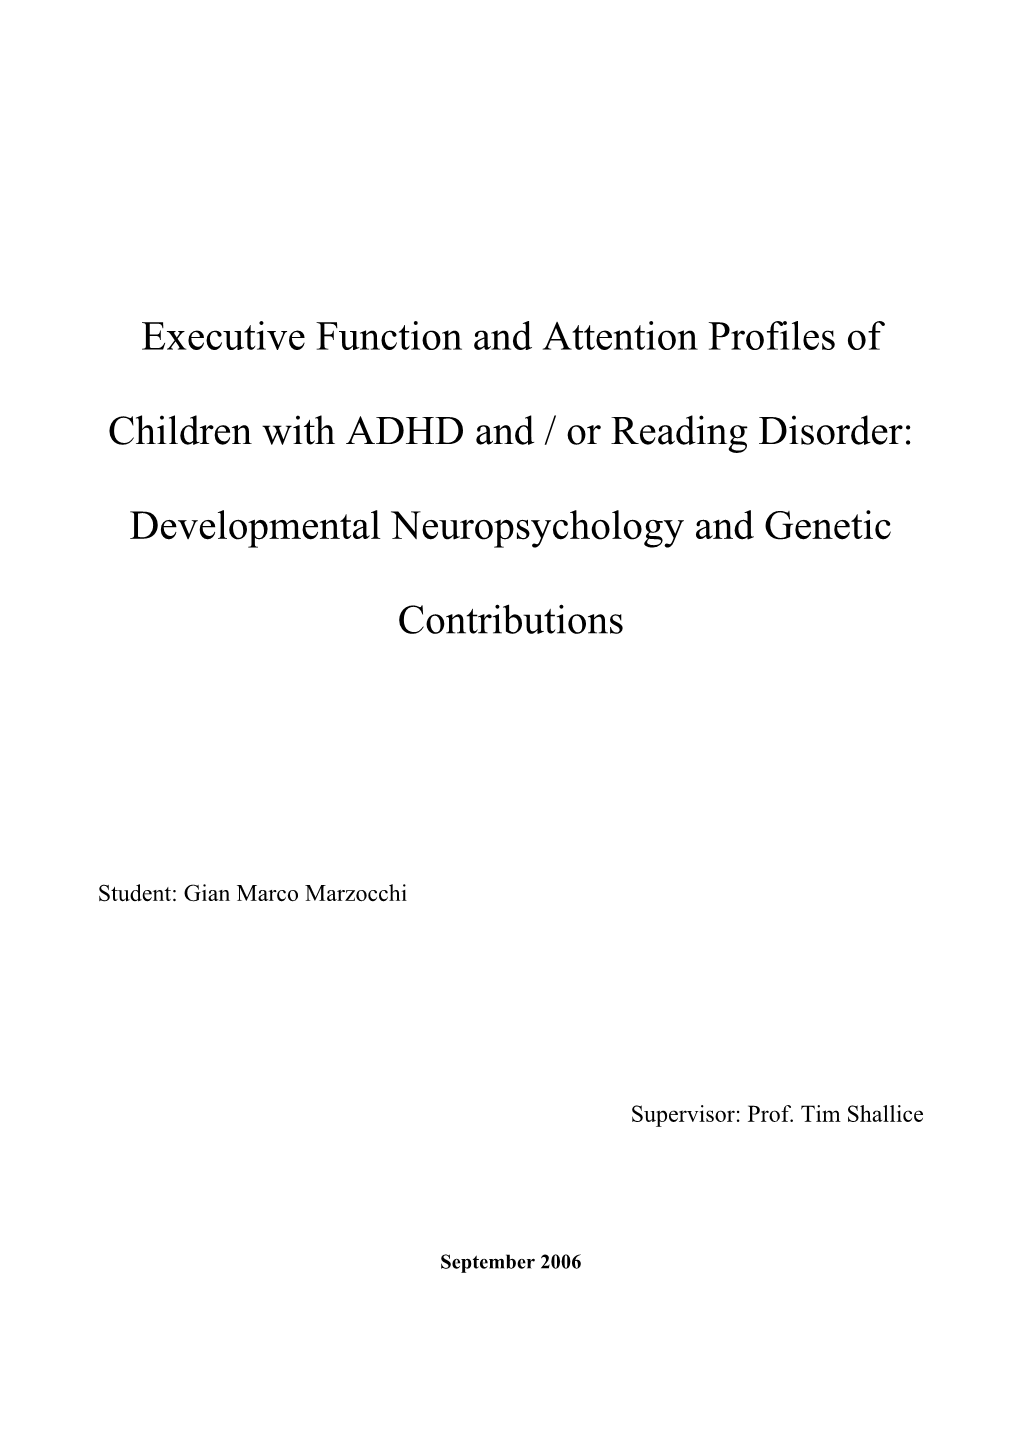 Executive Function and Attention Profiles of Children with ADHD And